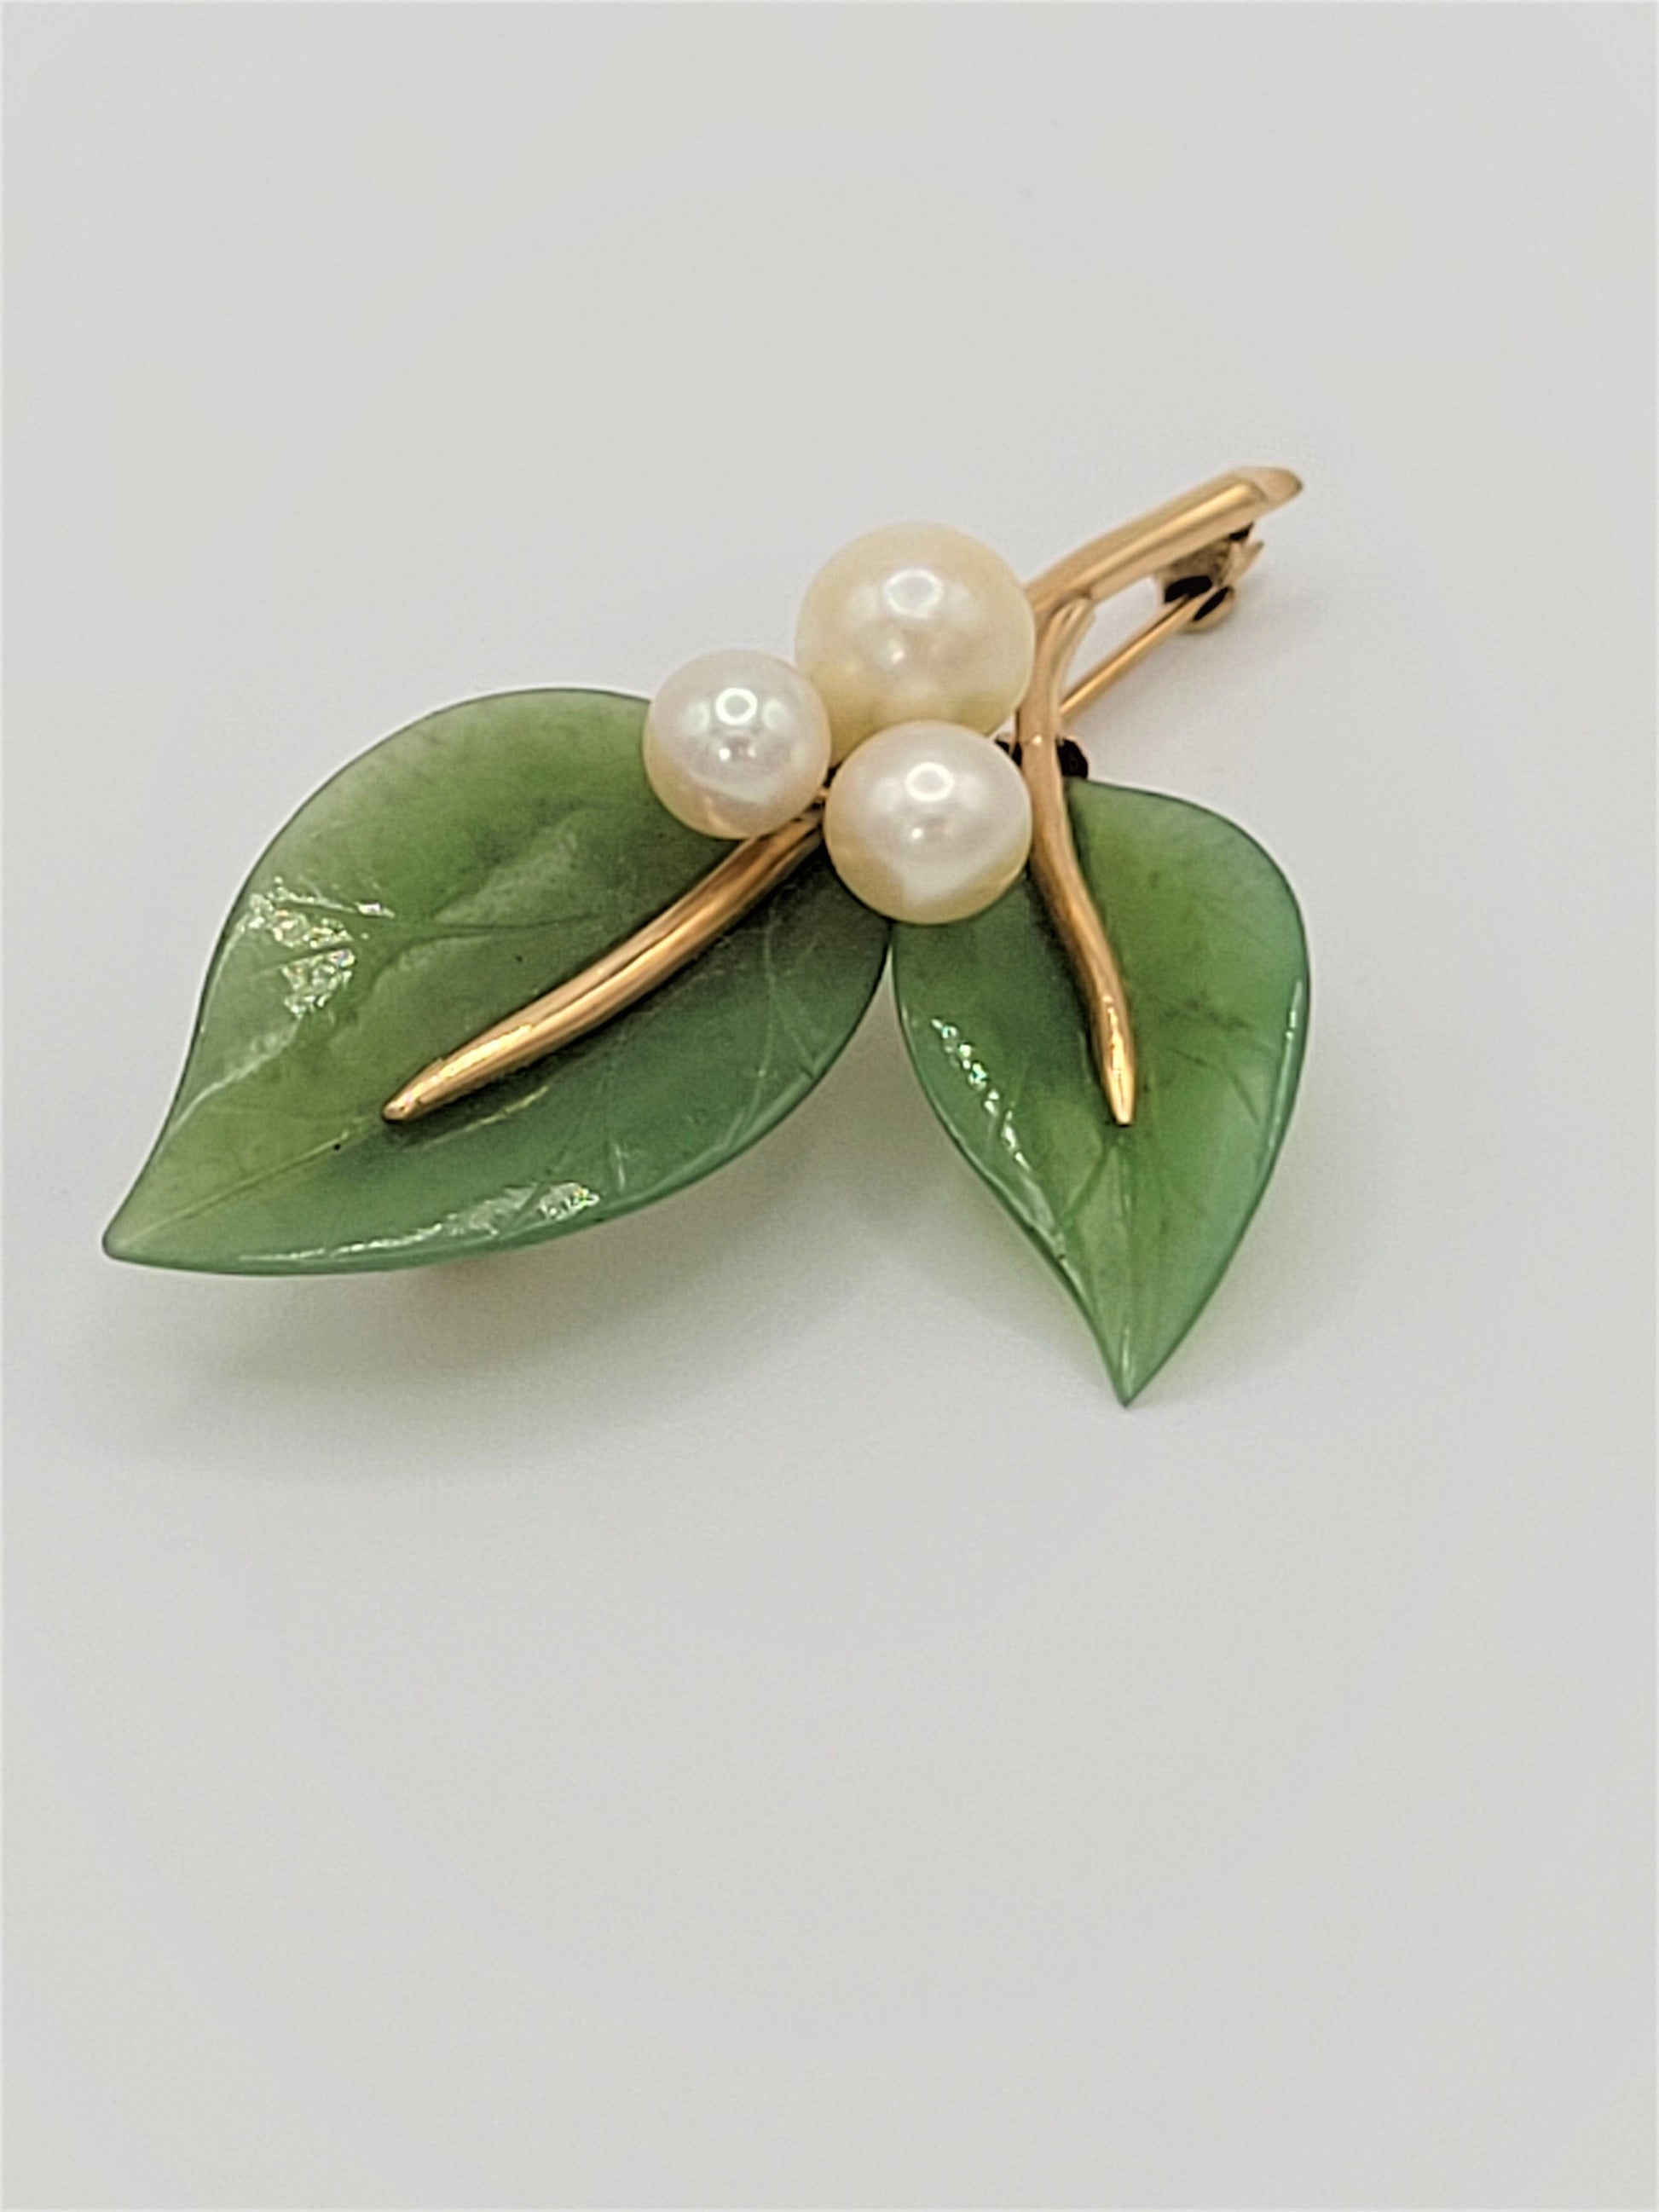 Gump's Jewelry Vintage Gumps 14k Gold Pearl Green Jade Flora Fauna Brooch RARE Mint Condition!